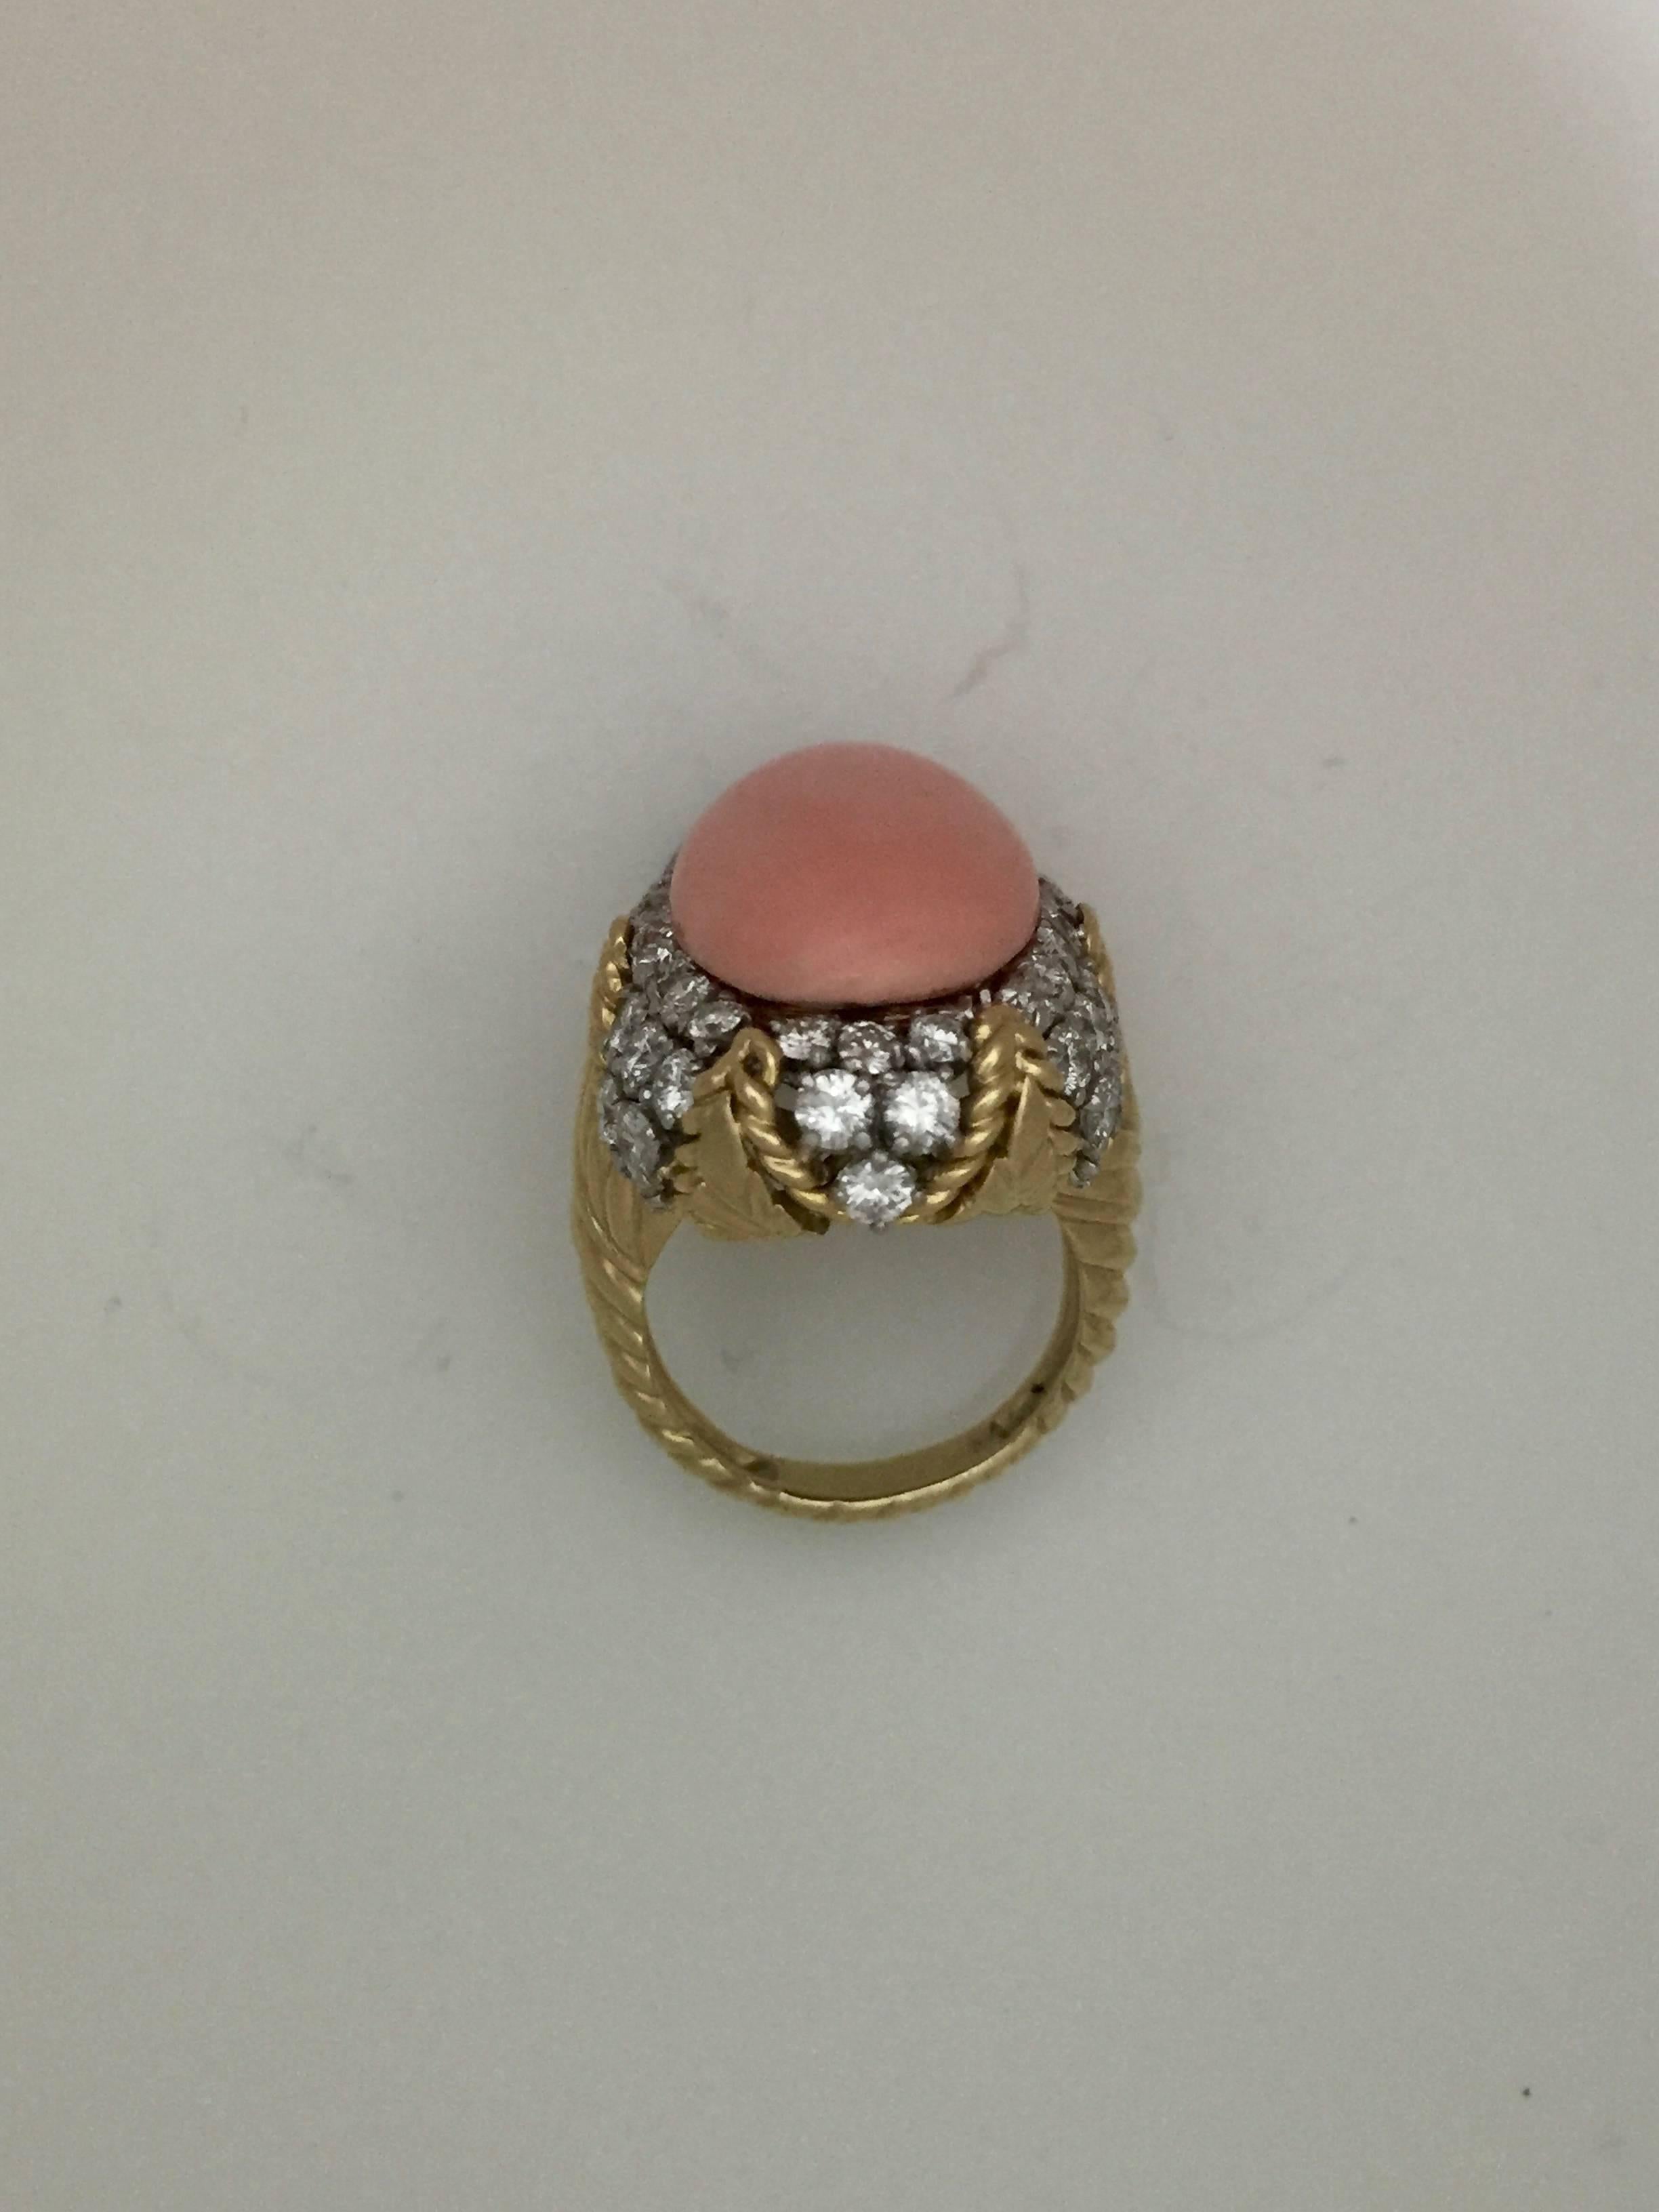 The elegant cocktail ring set along the top with an oval cabochon coral (measuring approximately 20 x 13mm), a flattering feminine shade of medium salmon pink, held from below (i.e. without prongs) above a decorative fluted gold and diamond mount